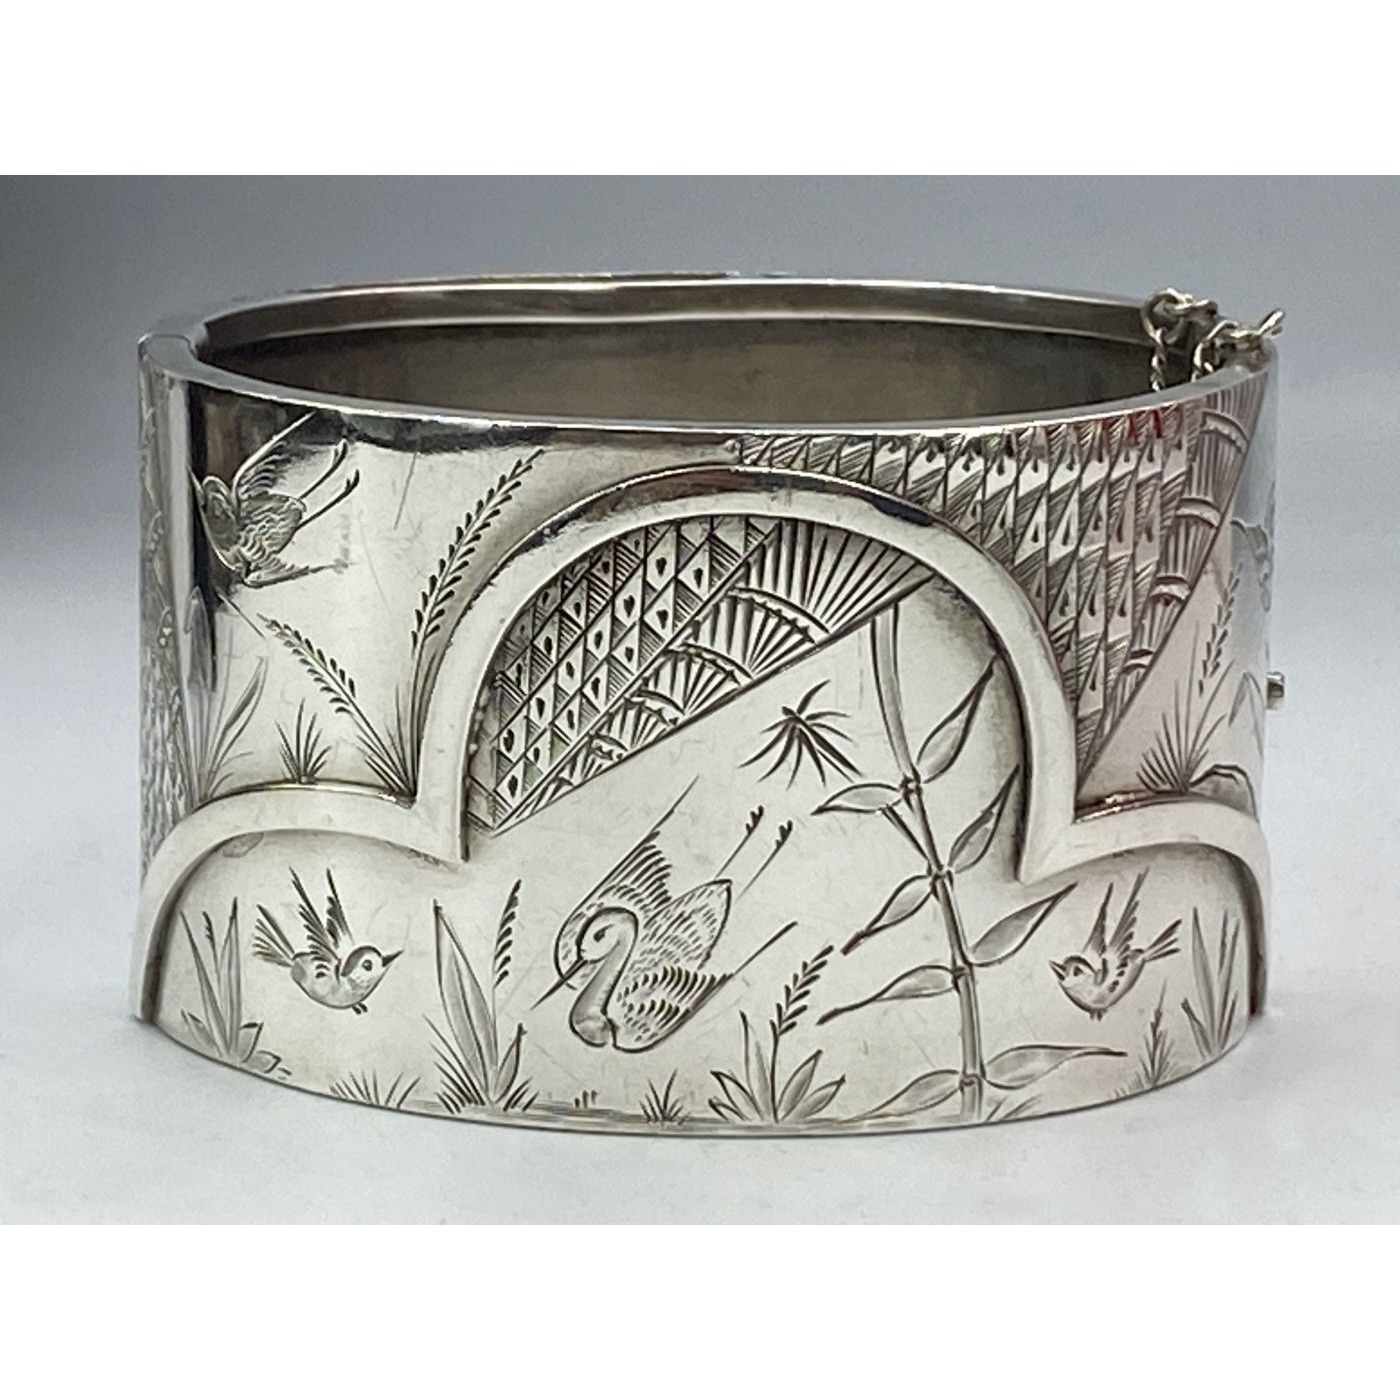 Unbelievable Swallows, Diving Birds, Cattails, Flowers Engraved Antique English Silver Bangle